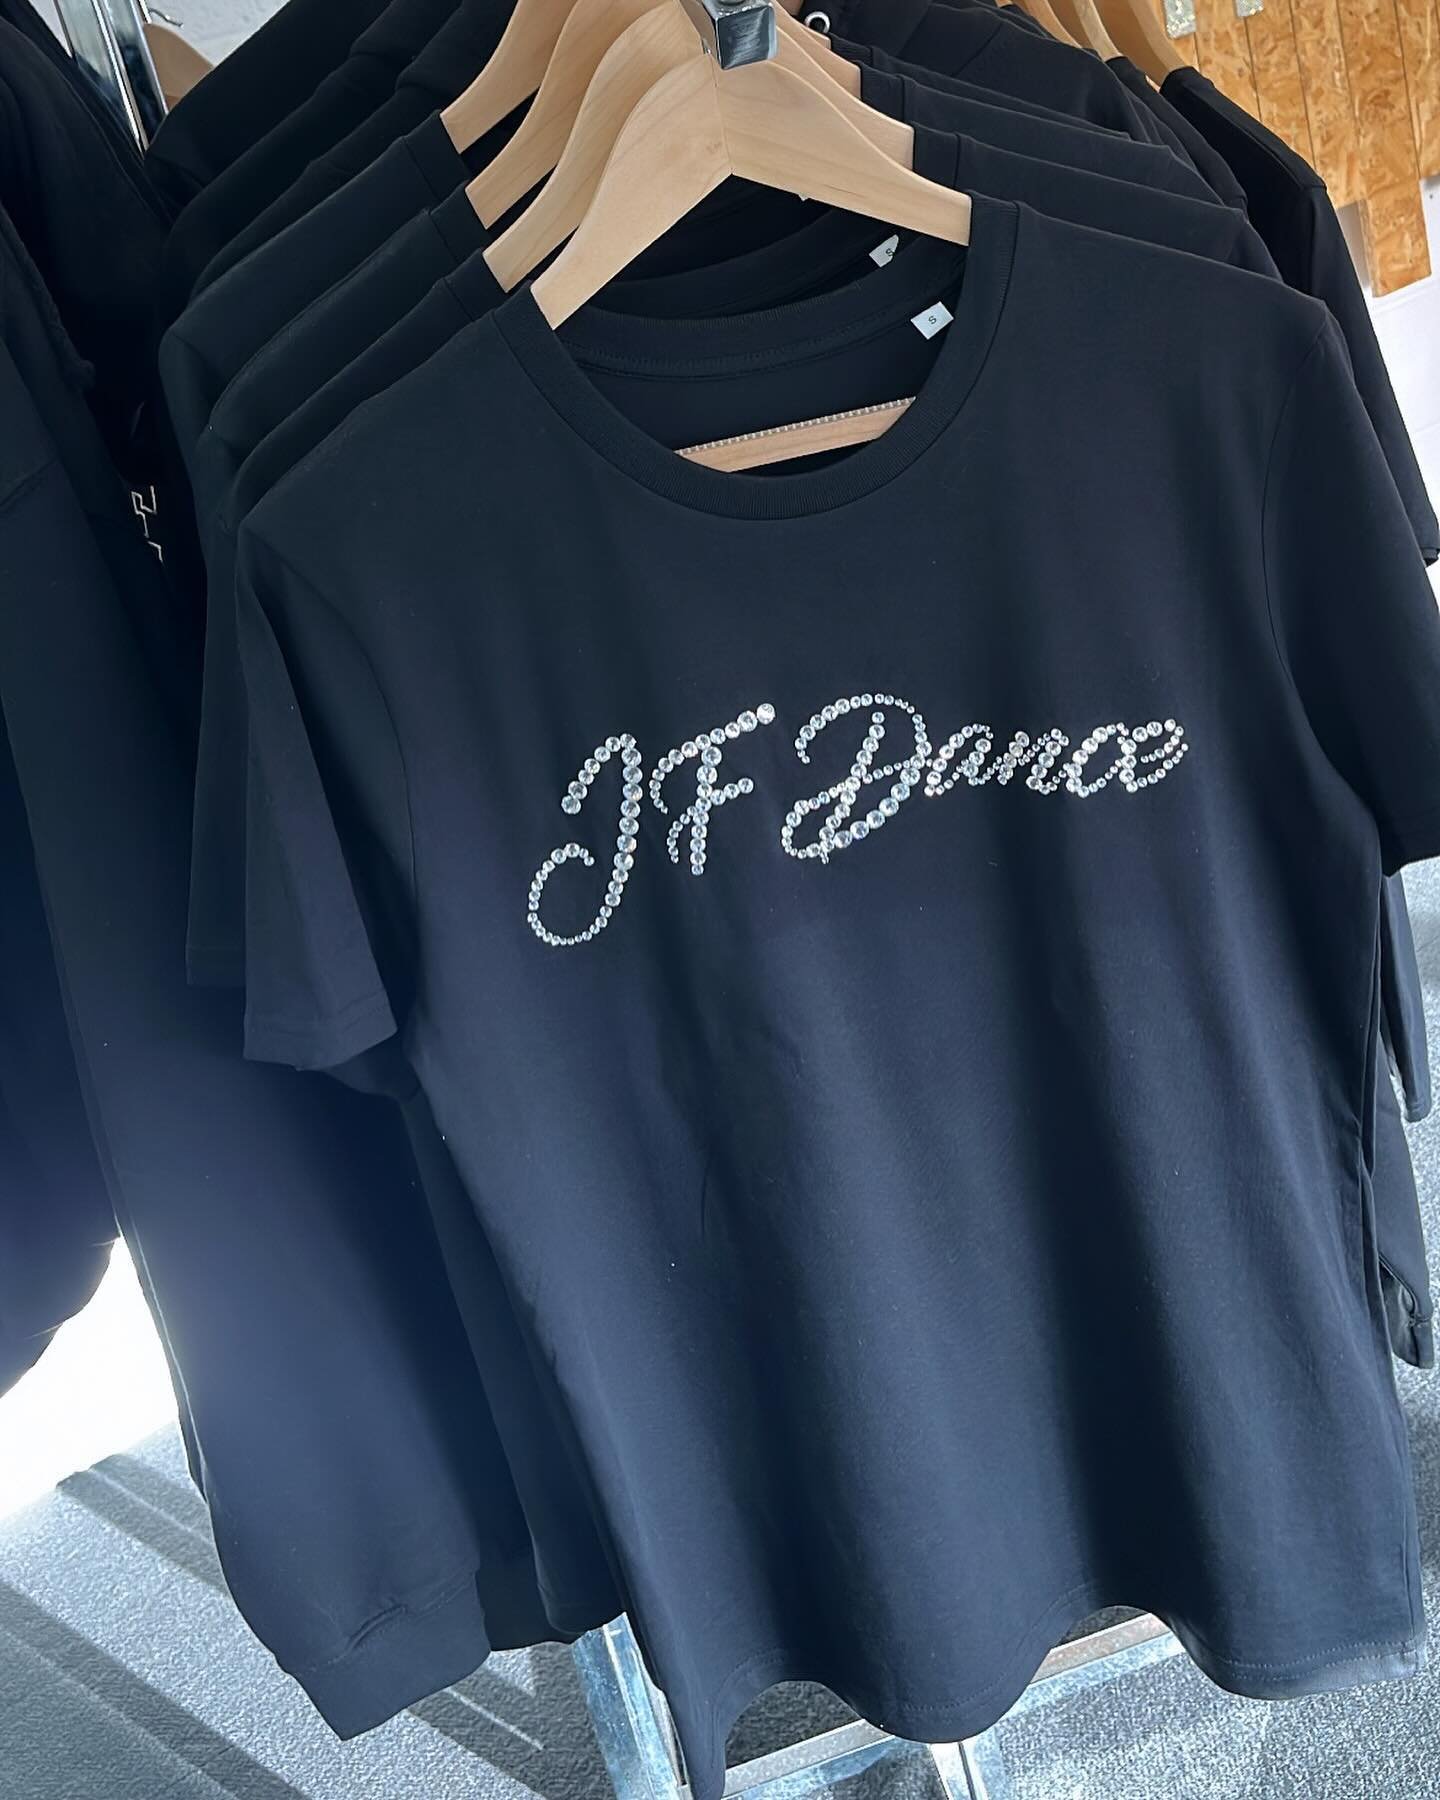 💥New for 2024💥&hellip;..JF Dance crystal 
t-shirts! 💎🖤
Kids &pound;25 sizes 5-6, 7-8, 9-11, 12-14
Adults &pound;30 sizes XS, S, M, L 

#jfdance #dance #dancer #tshirt #crystals